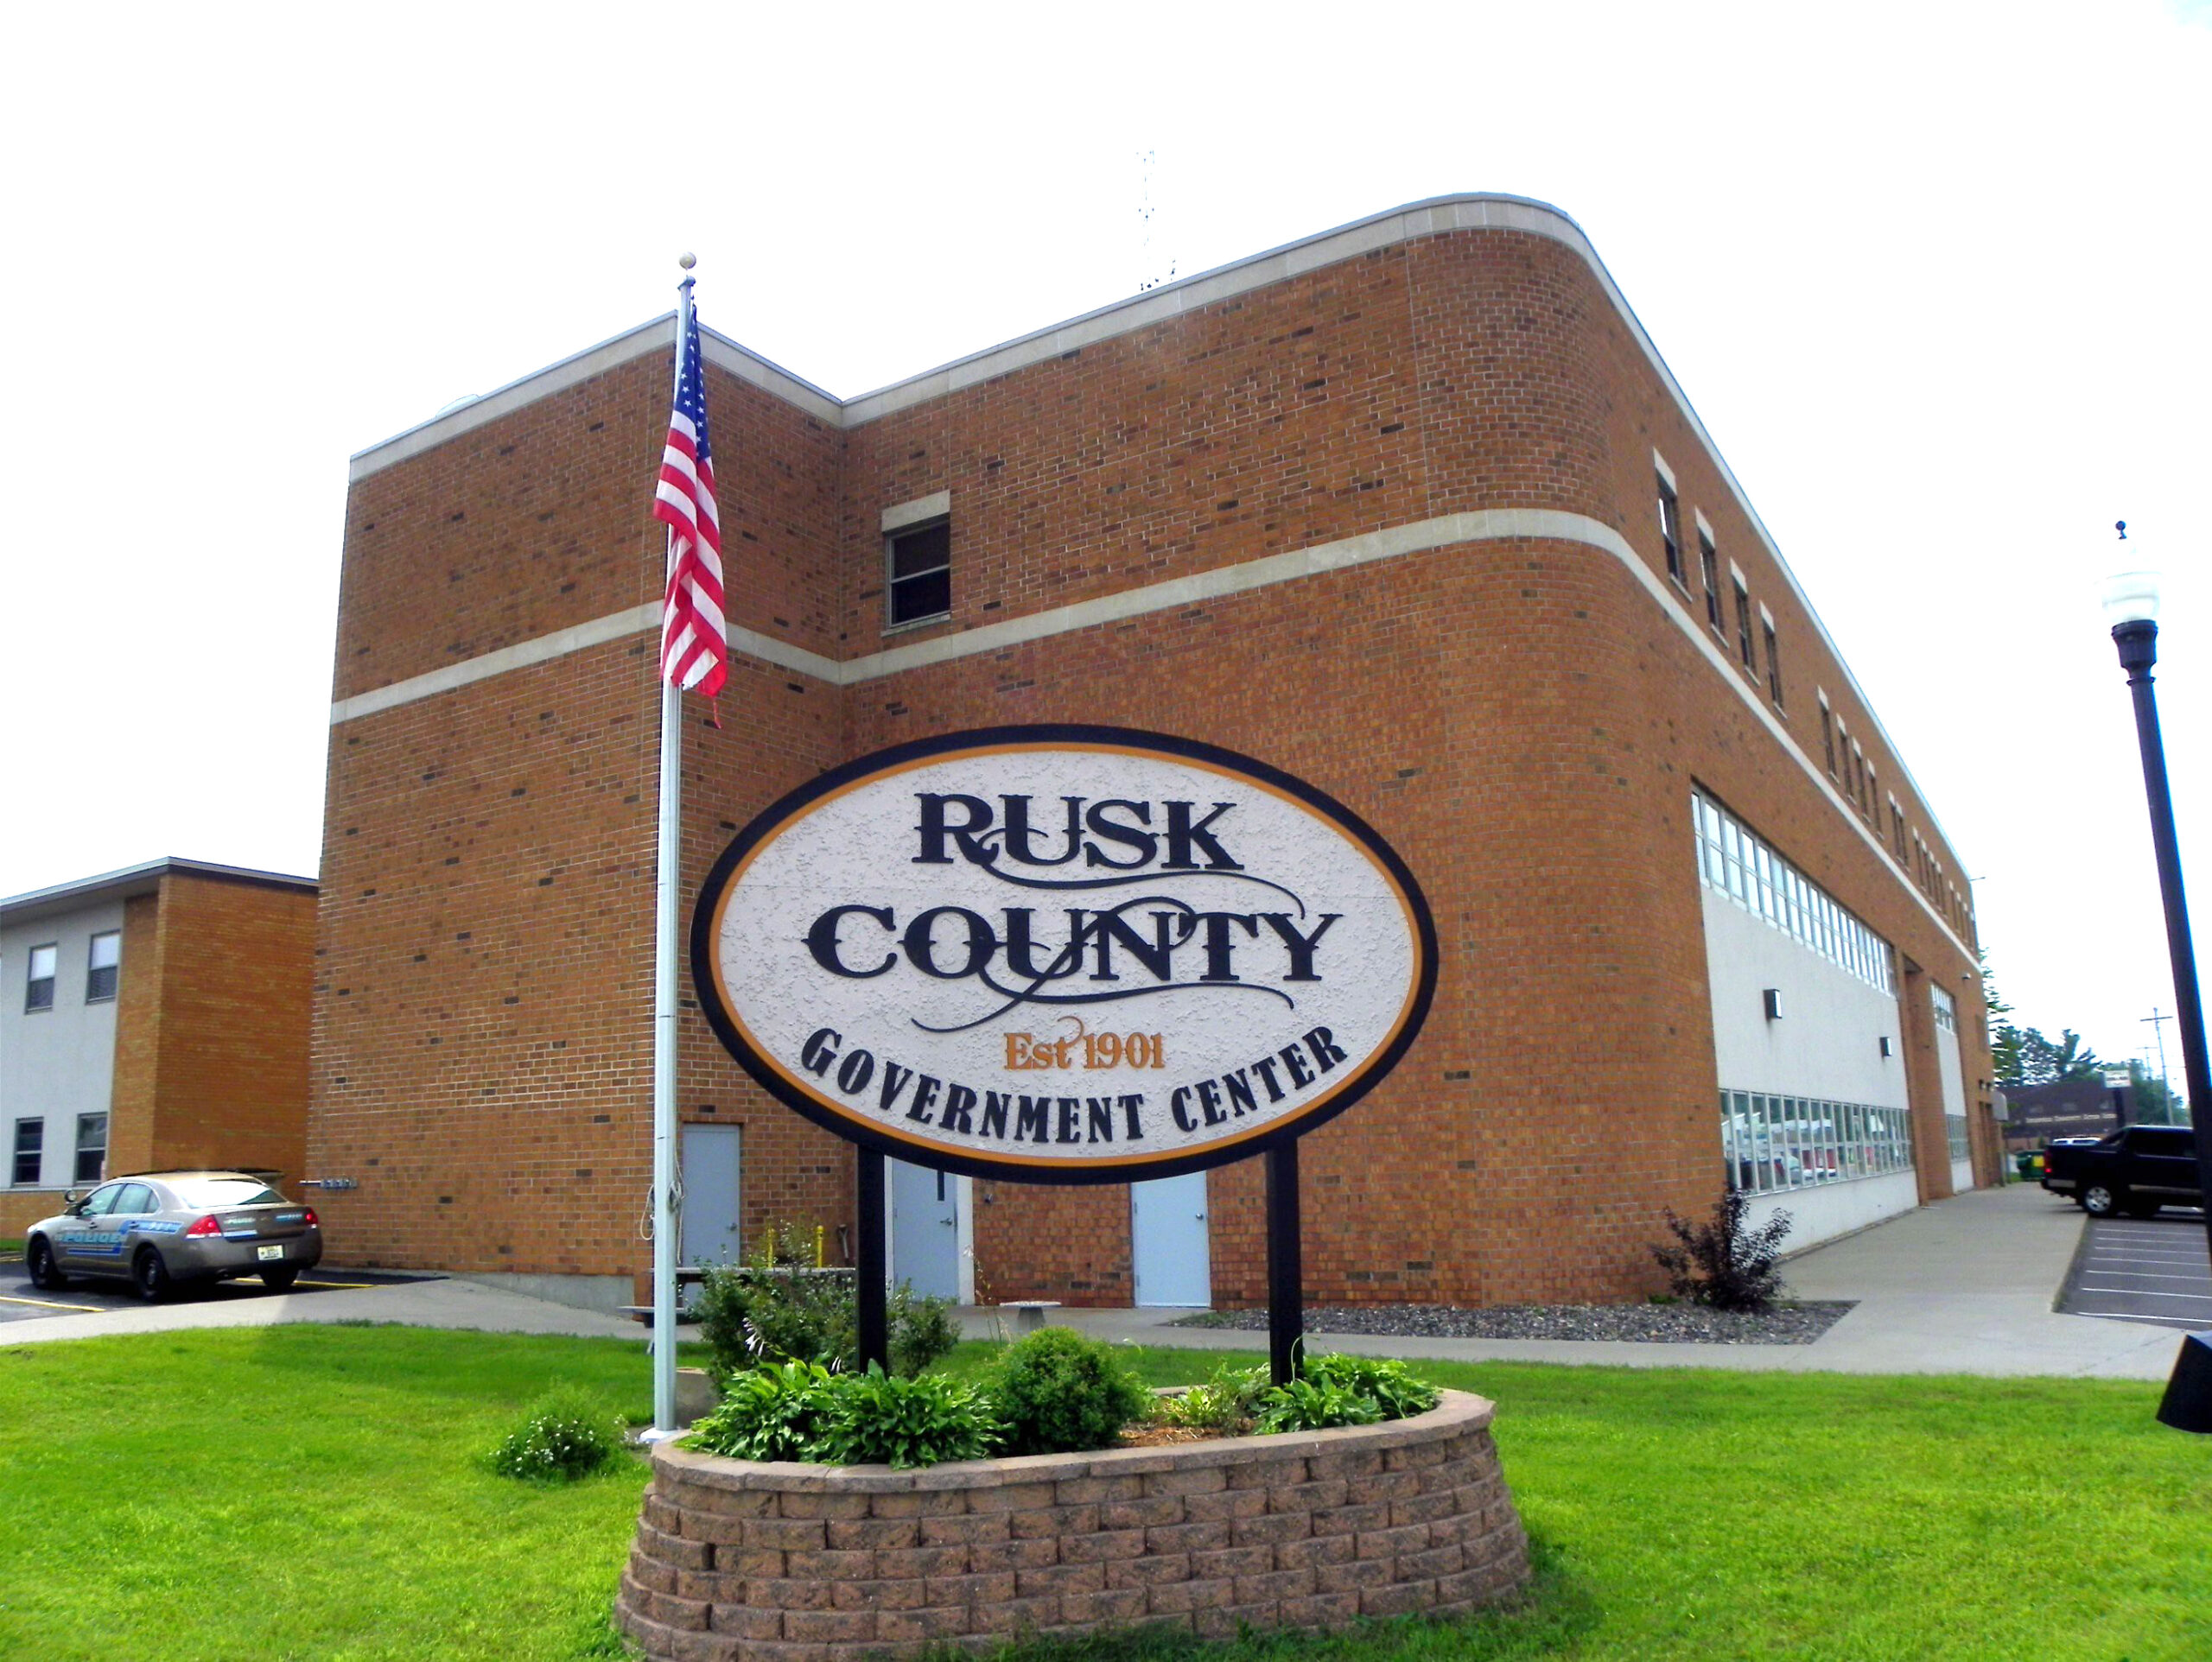 The county government building for Rusk County in Ladysmith.